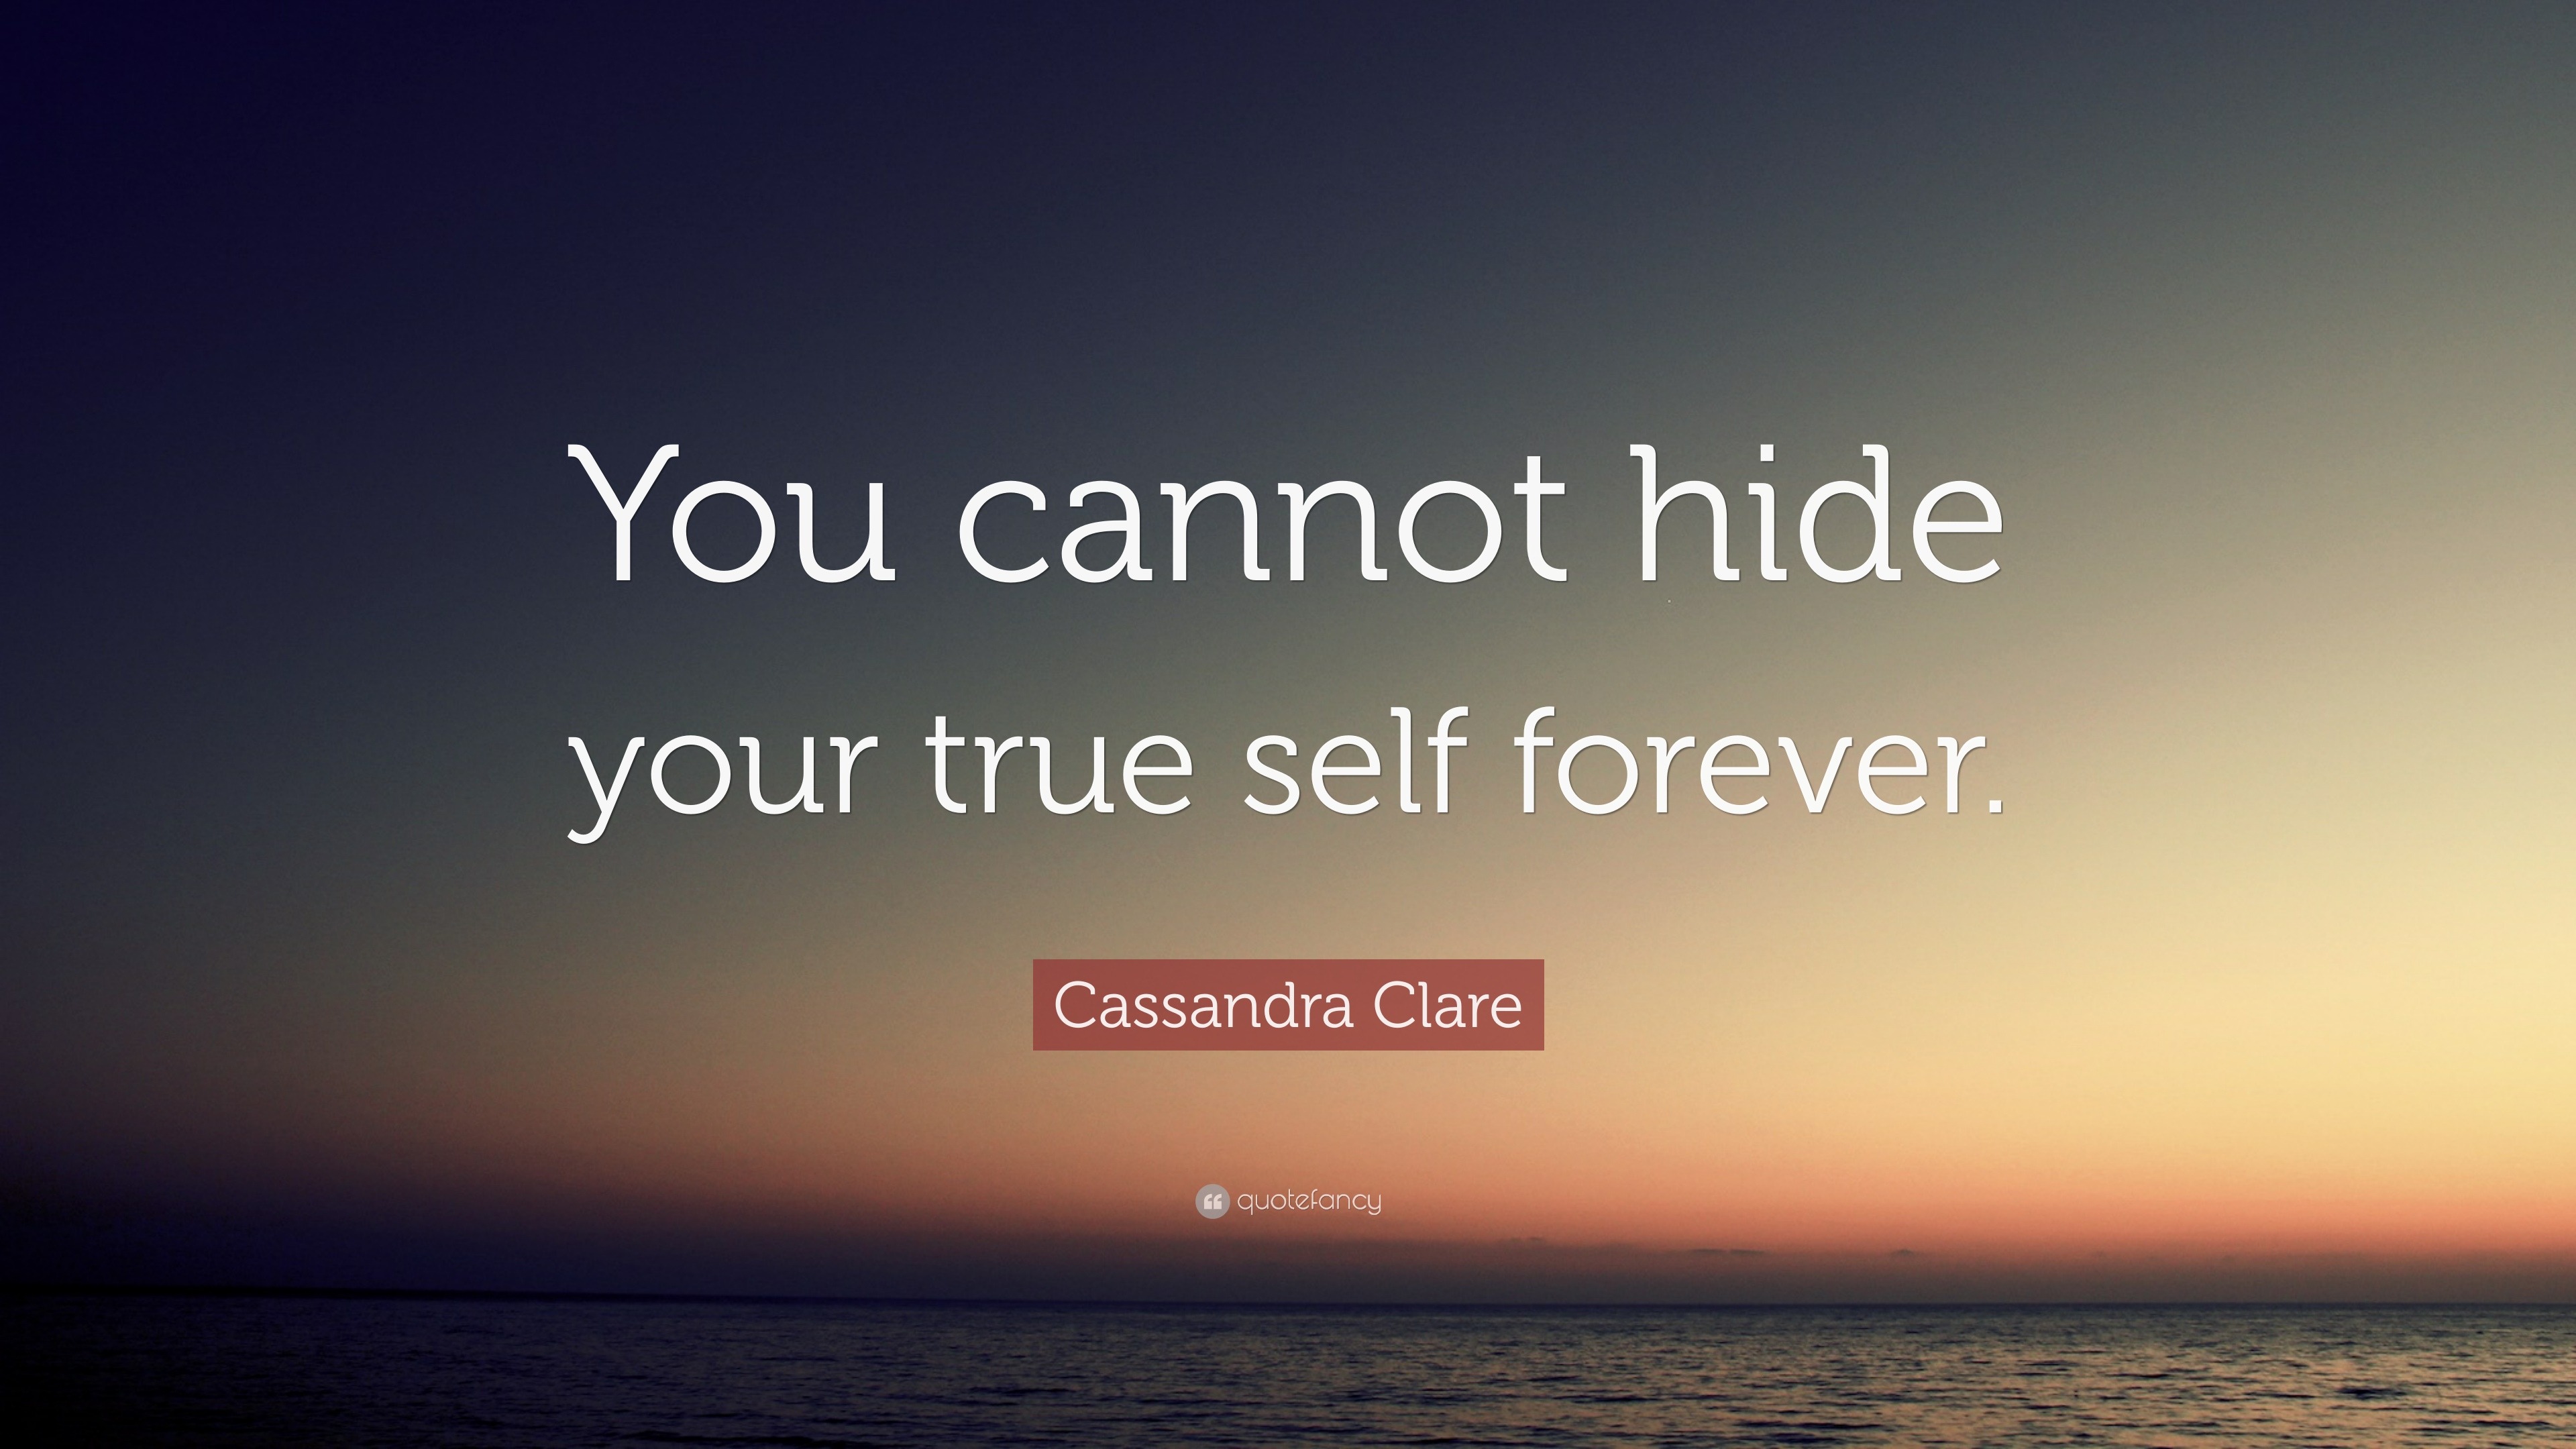 Cassandra Clare Quote: “You cannot hide your true self forever.”